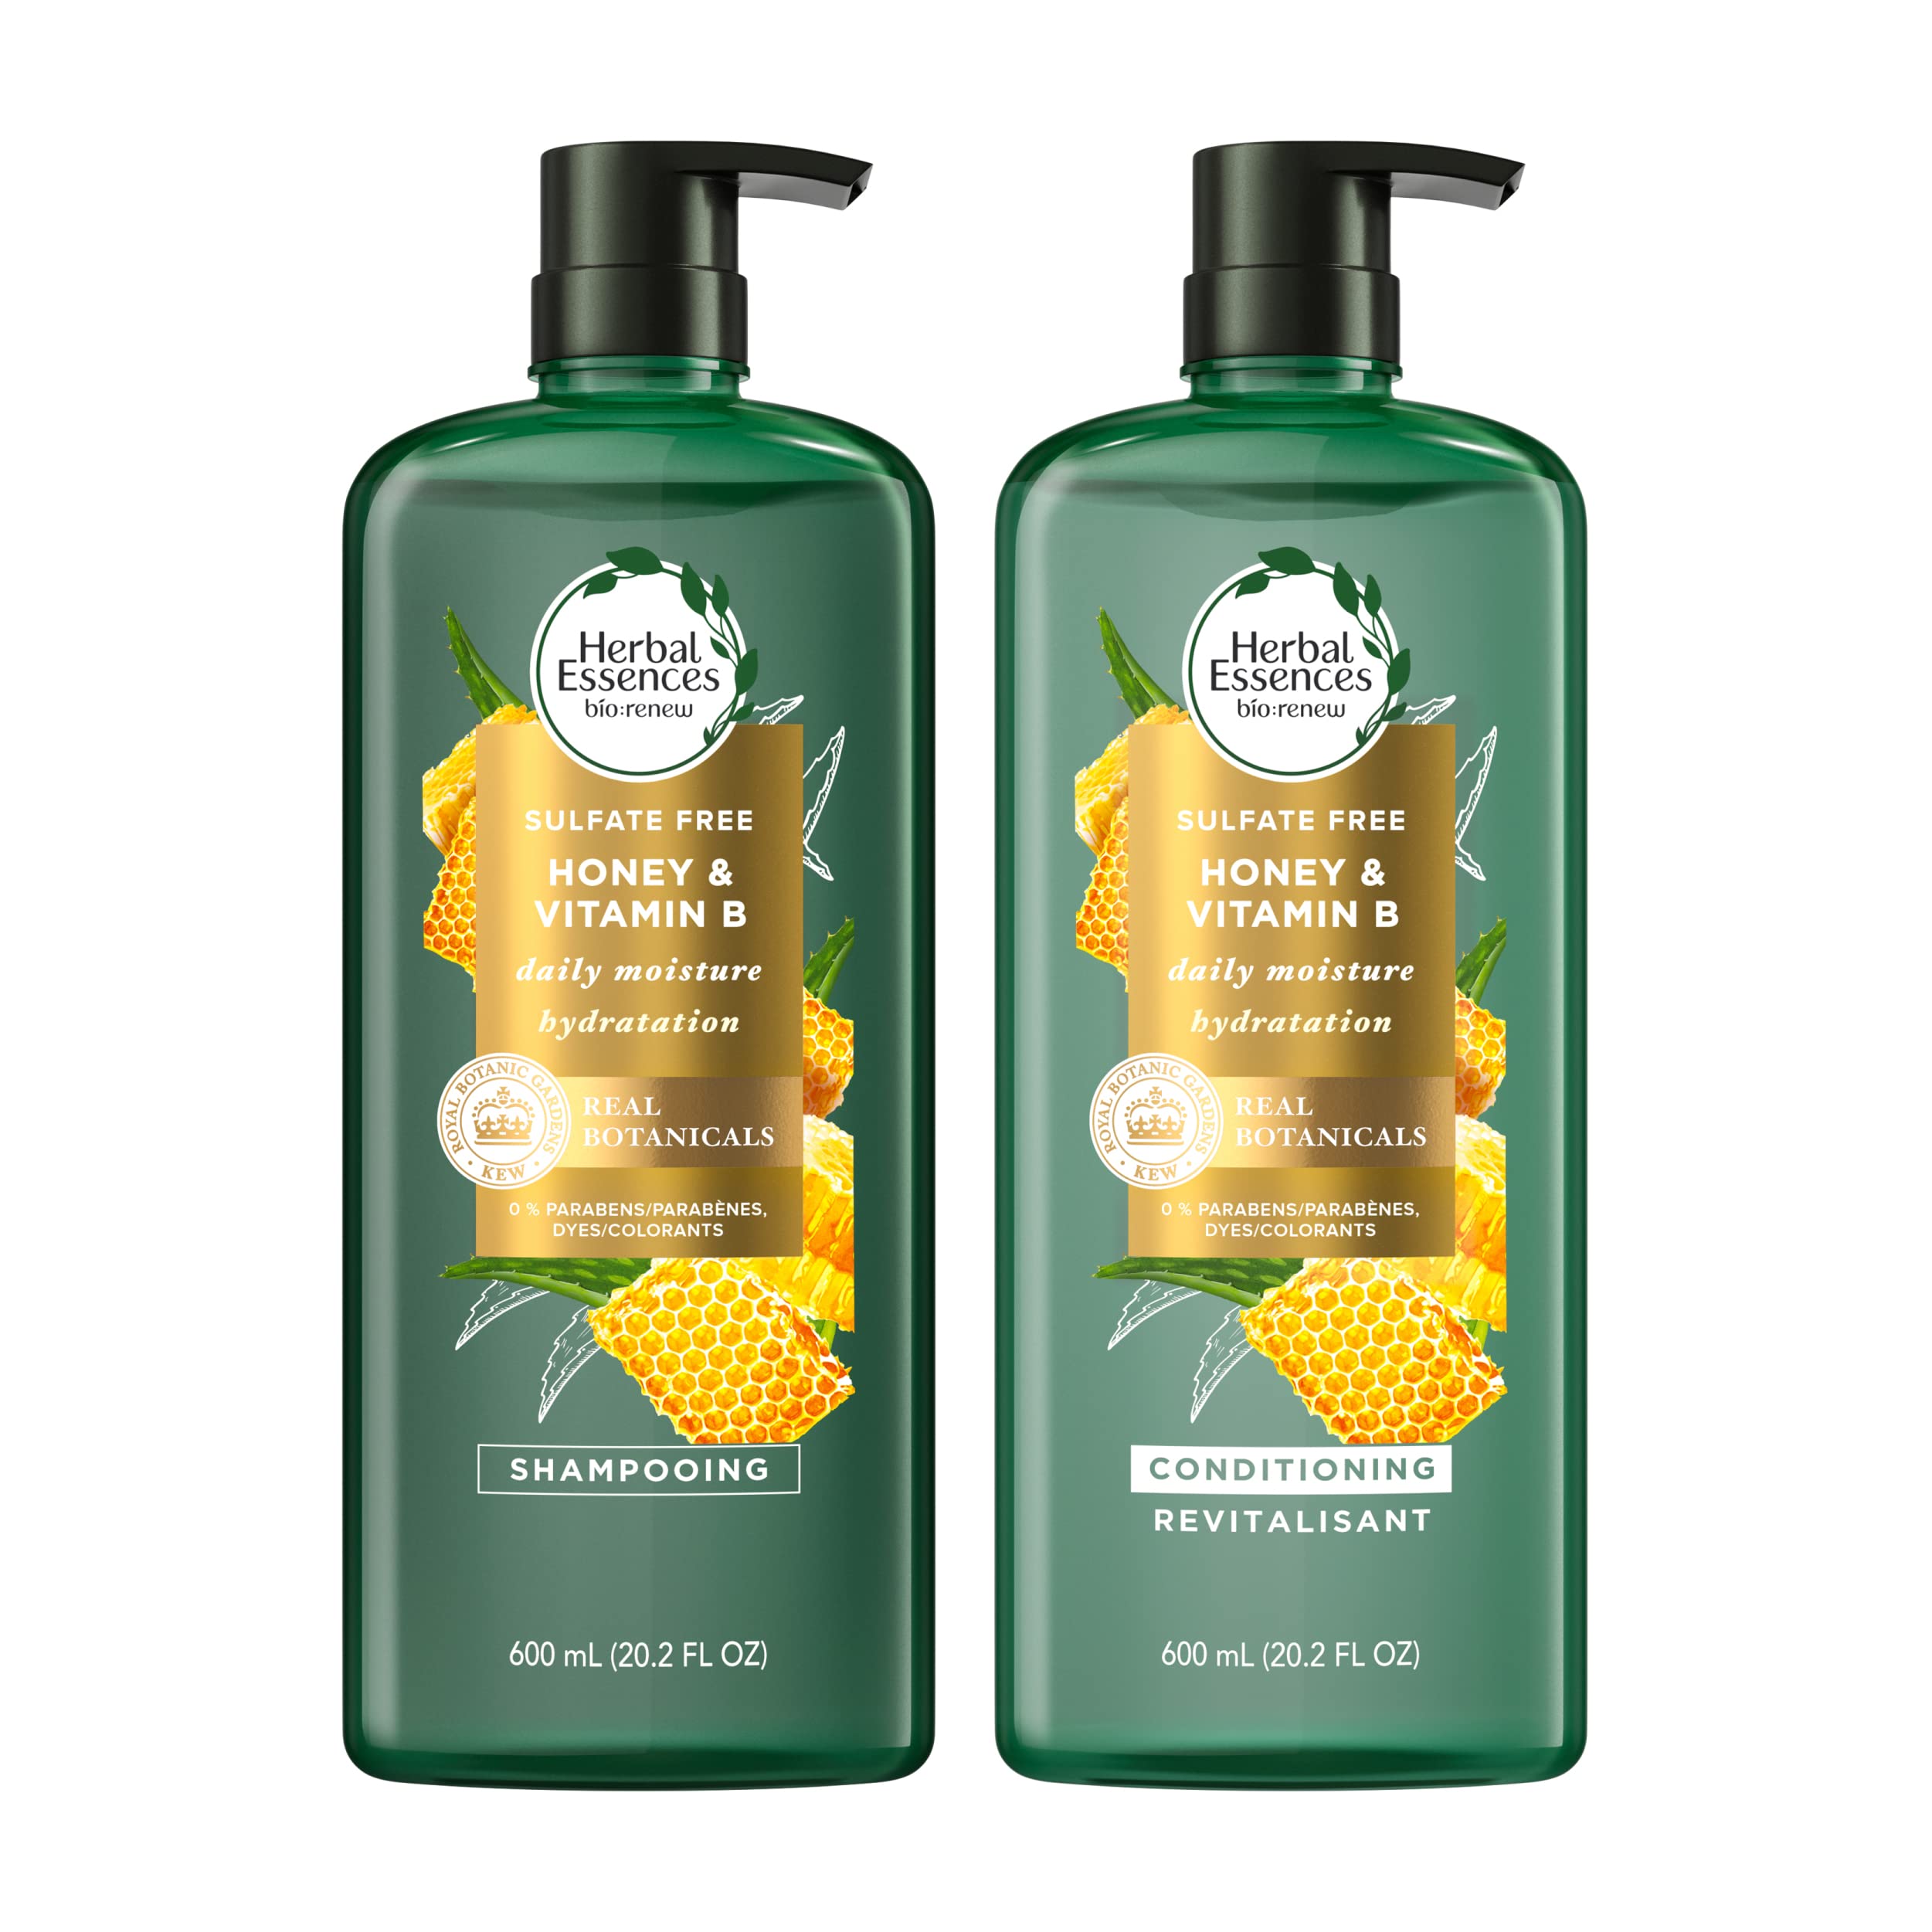 Herbal Essences bio:renew Sulfate Shampoo and Conditioner Set with Honey + Vitamin B, 20.2 Fl Oz Each Hair Products Infused with Real Aloe & Honey Paraben Free, Safe Color Treated